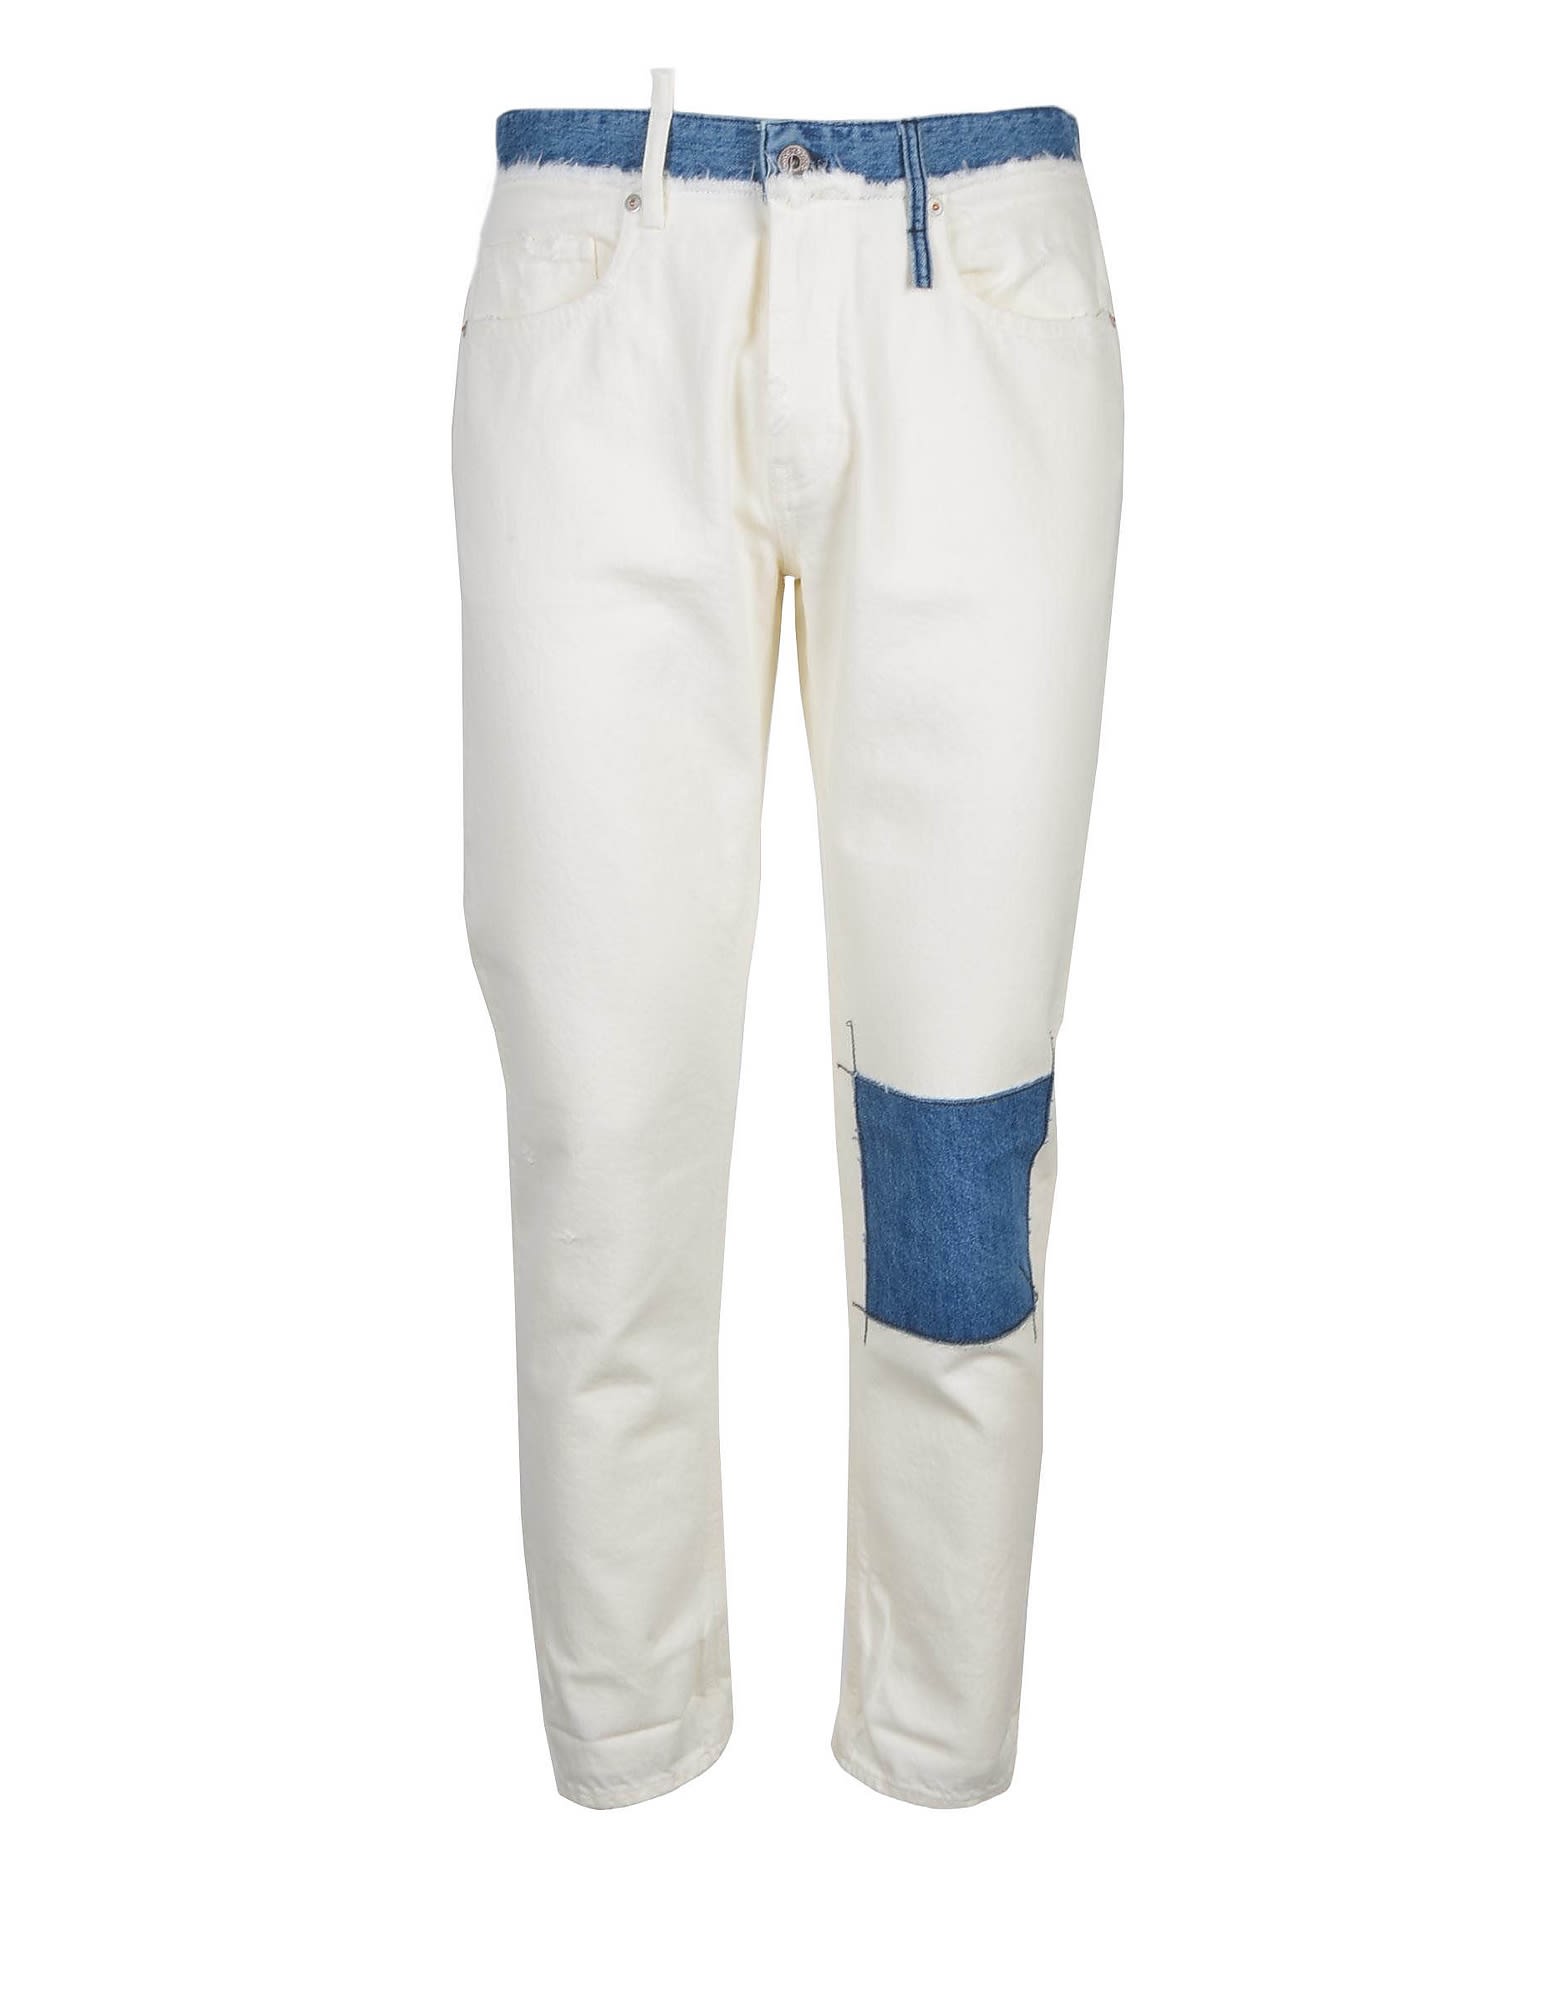 Pence Mens White Jeans